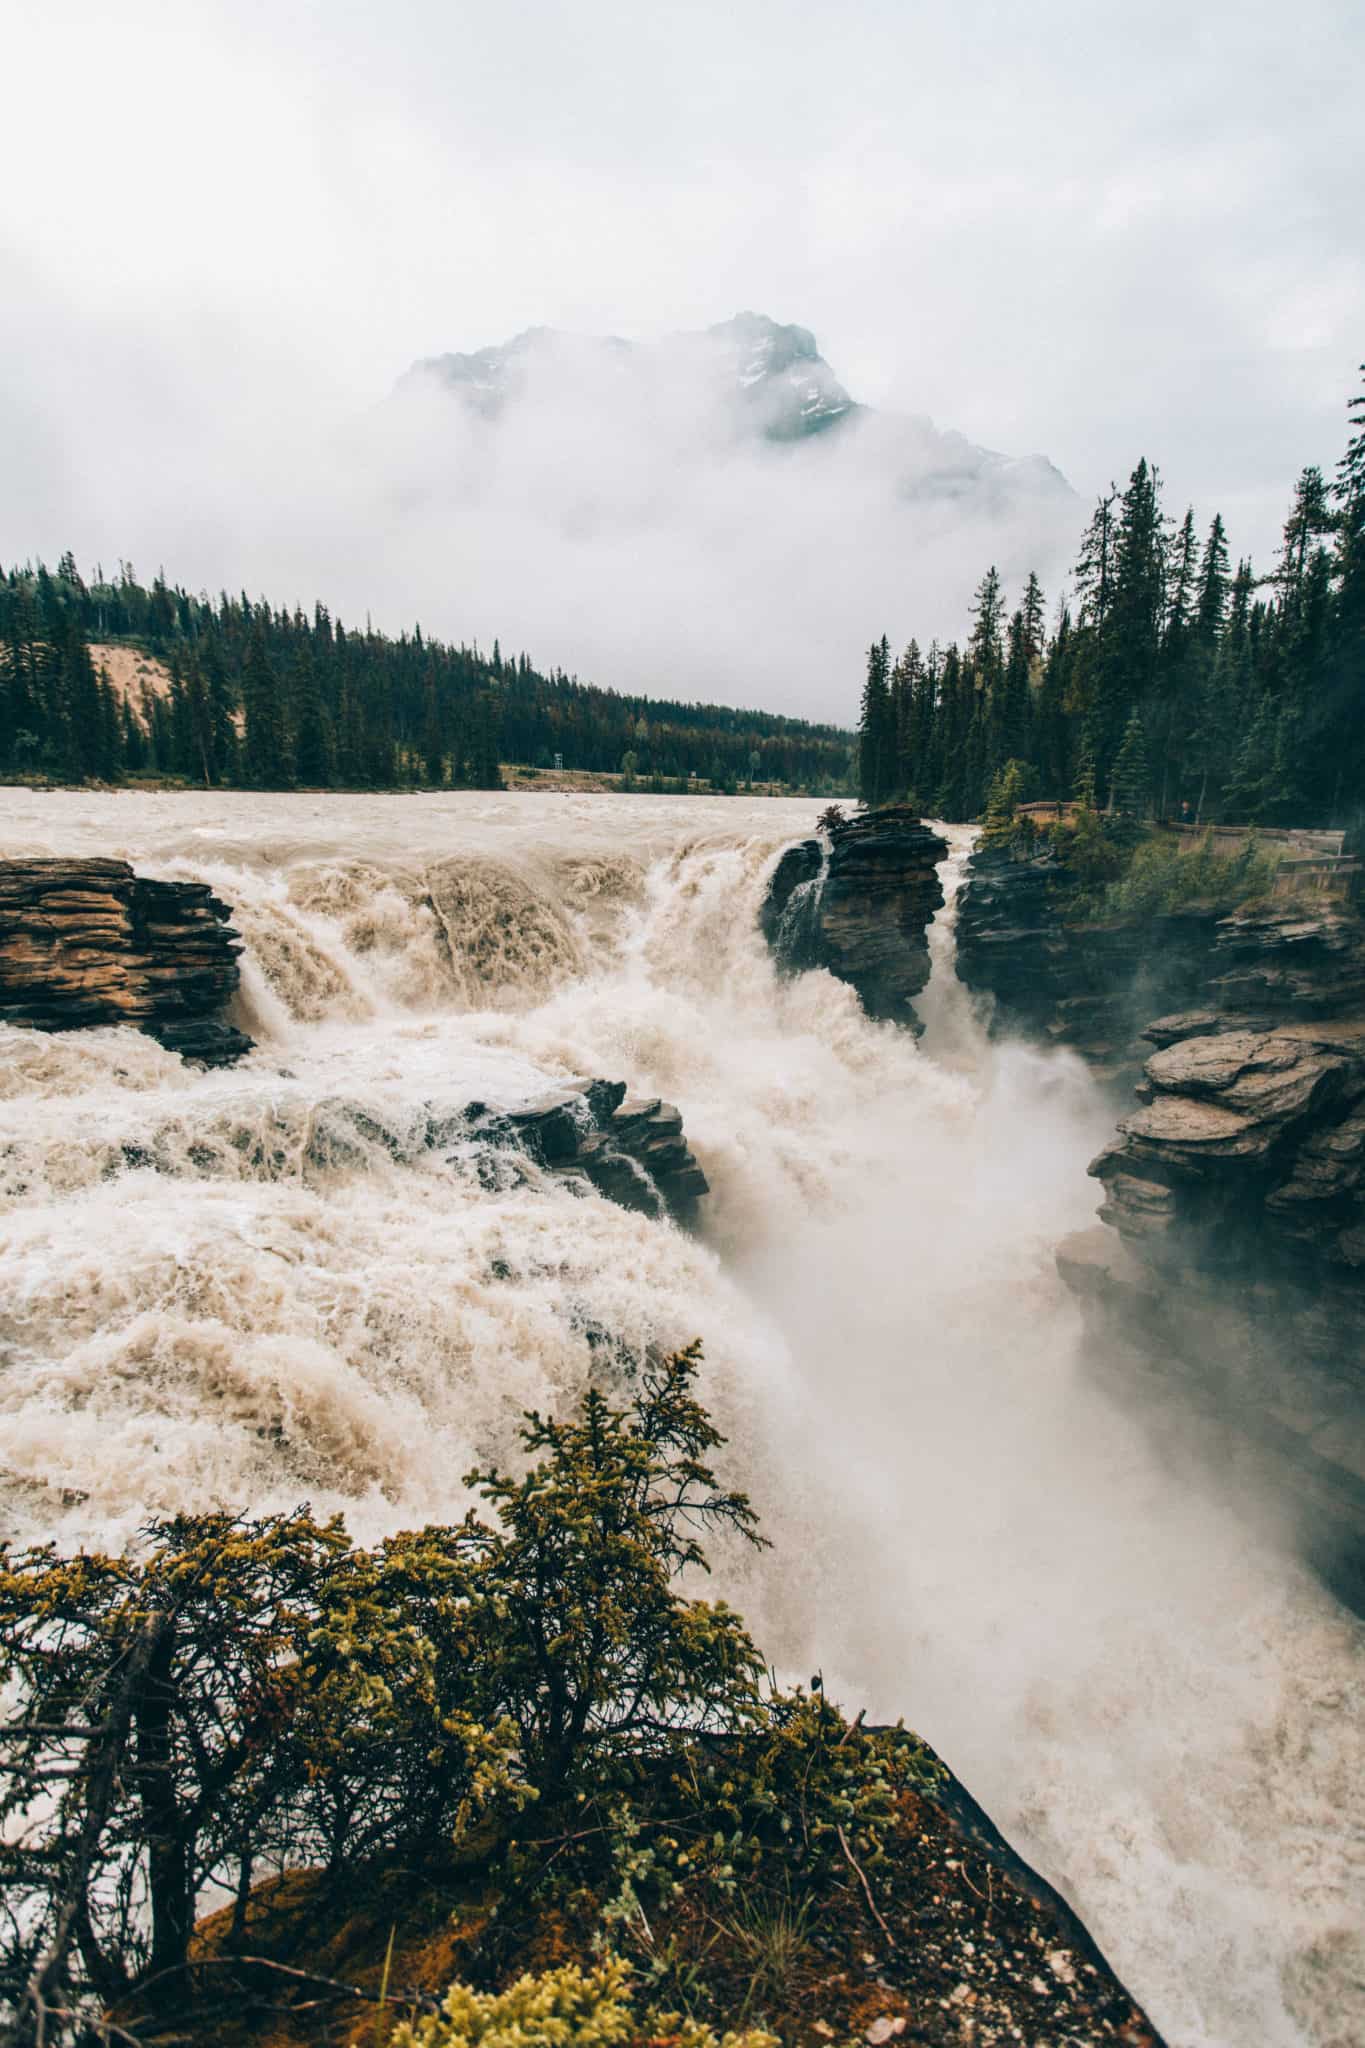 Easy Hikes In Jasper National Park - Athabasca Falls